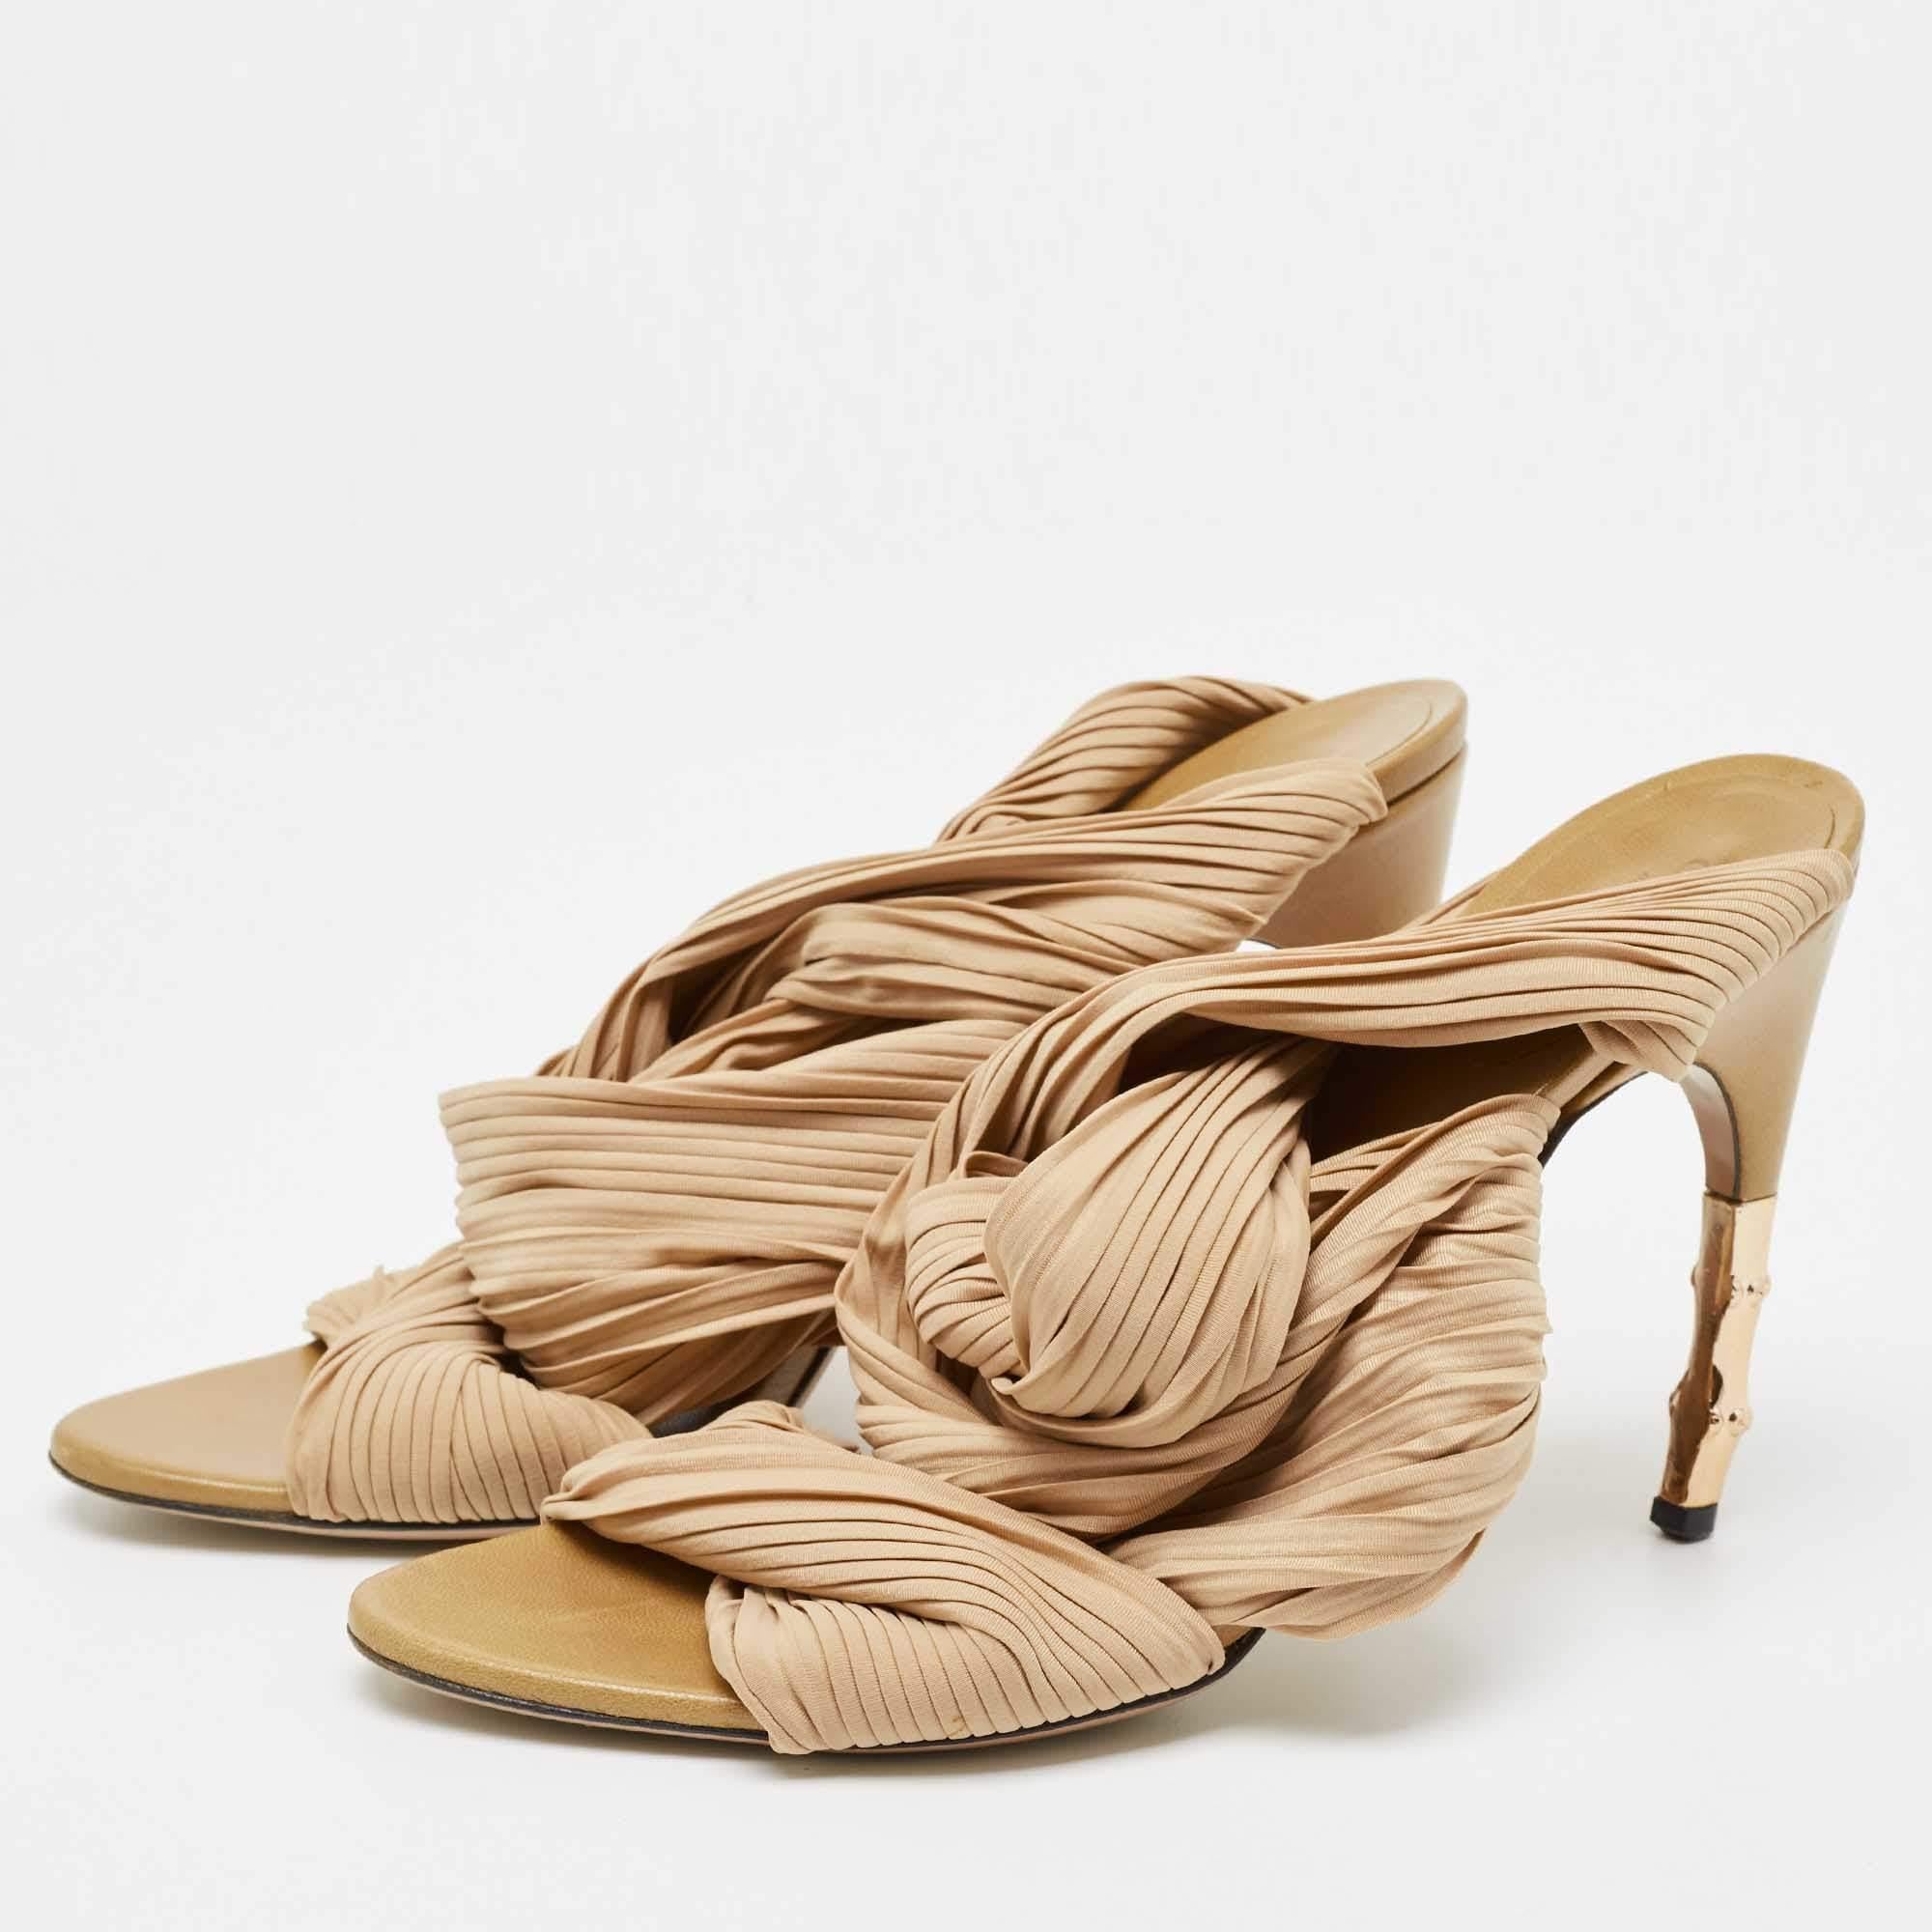 Women's Gucci Nude Fabric Pleated Strap Bamboo Heel Mule Sandals Size 38.5